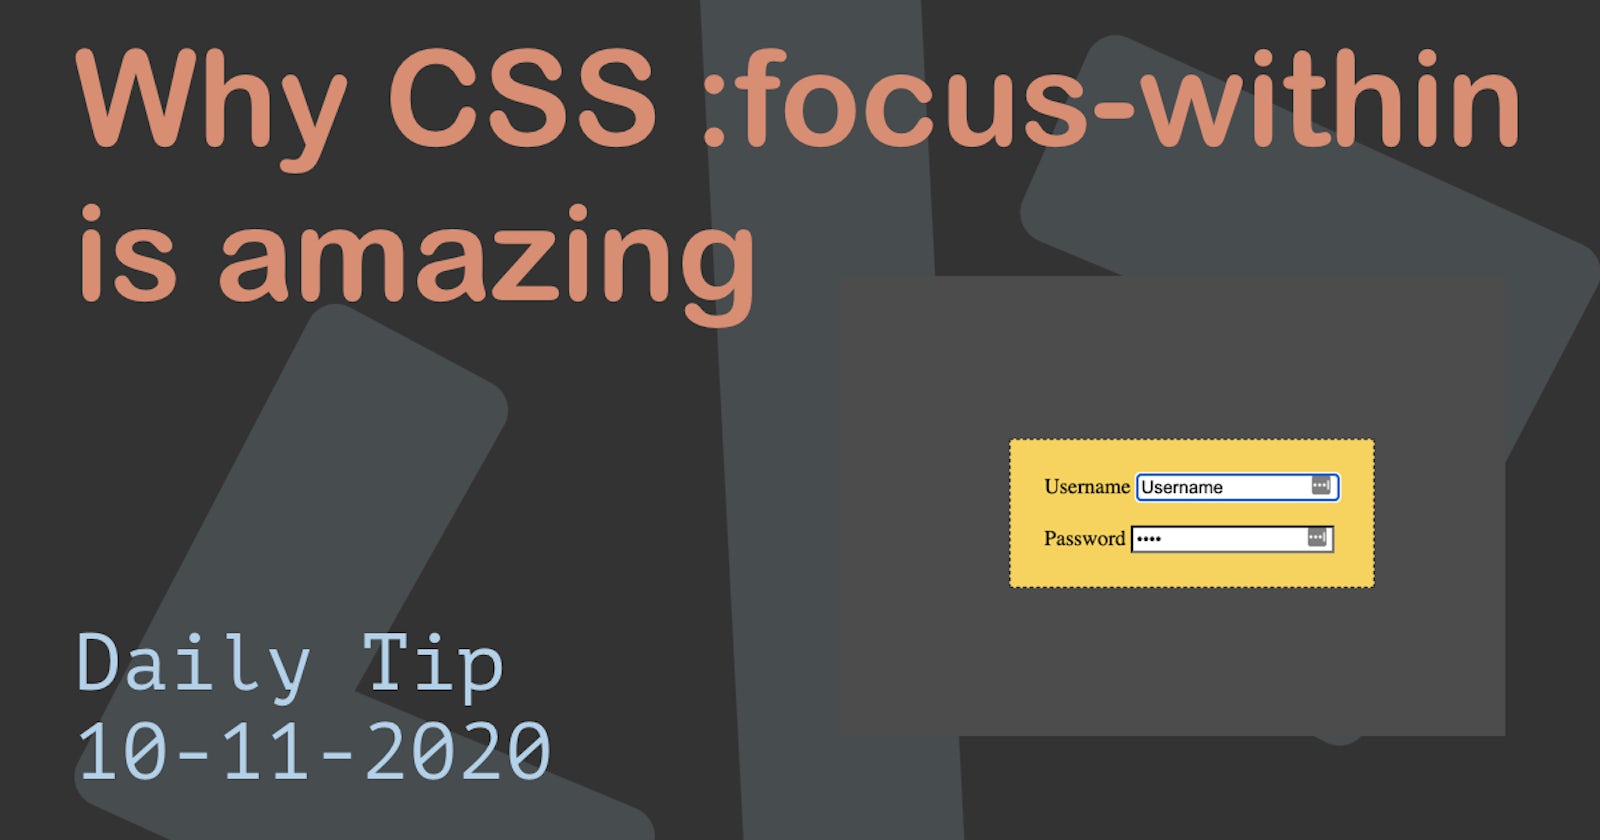 Why CSS :focus-within is amazing